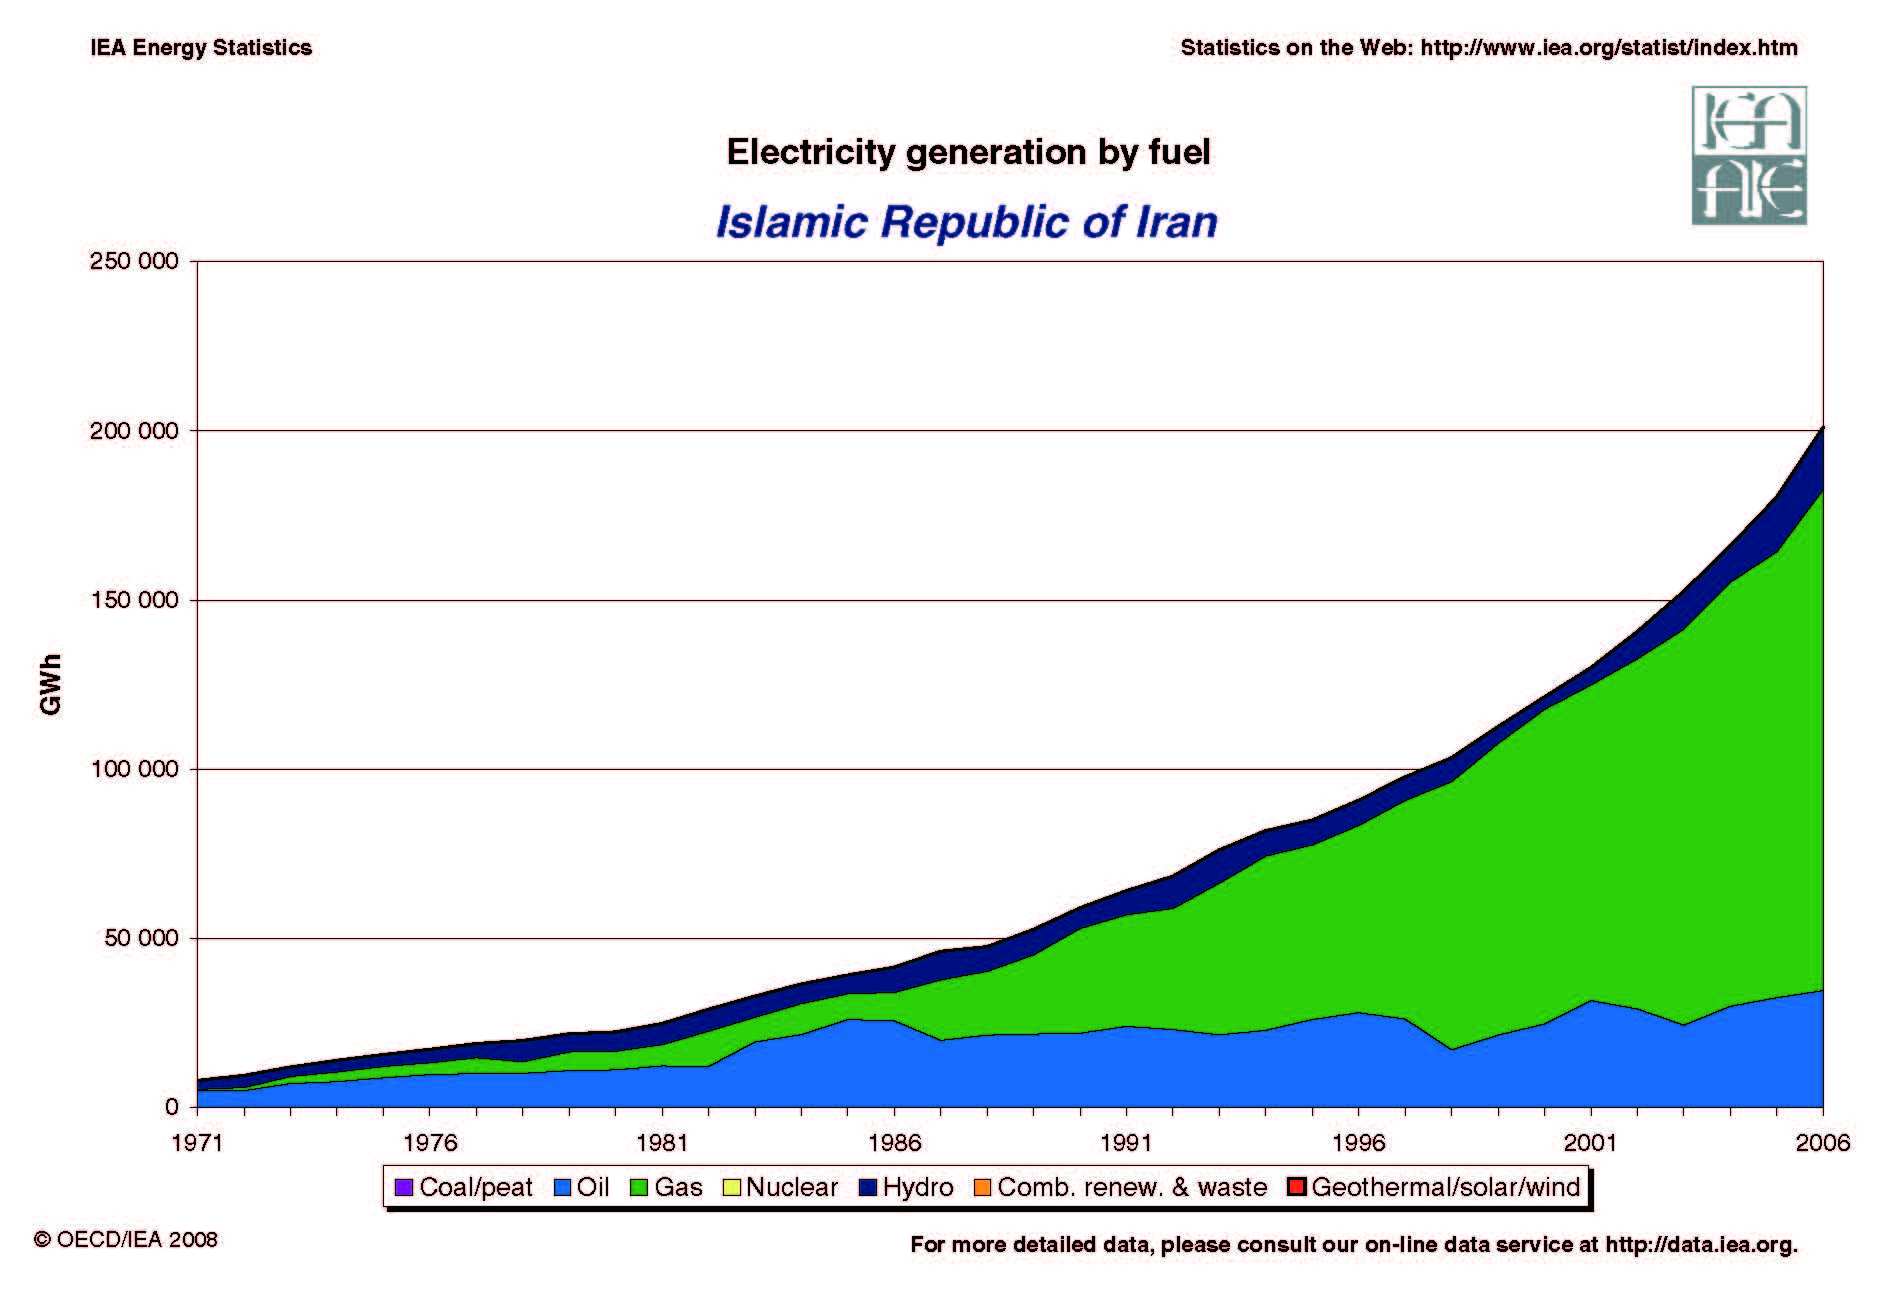 Iran Evolution of Electricity Generation by Fuel 1971 - 2005